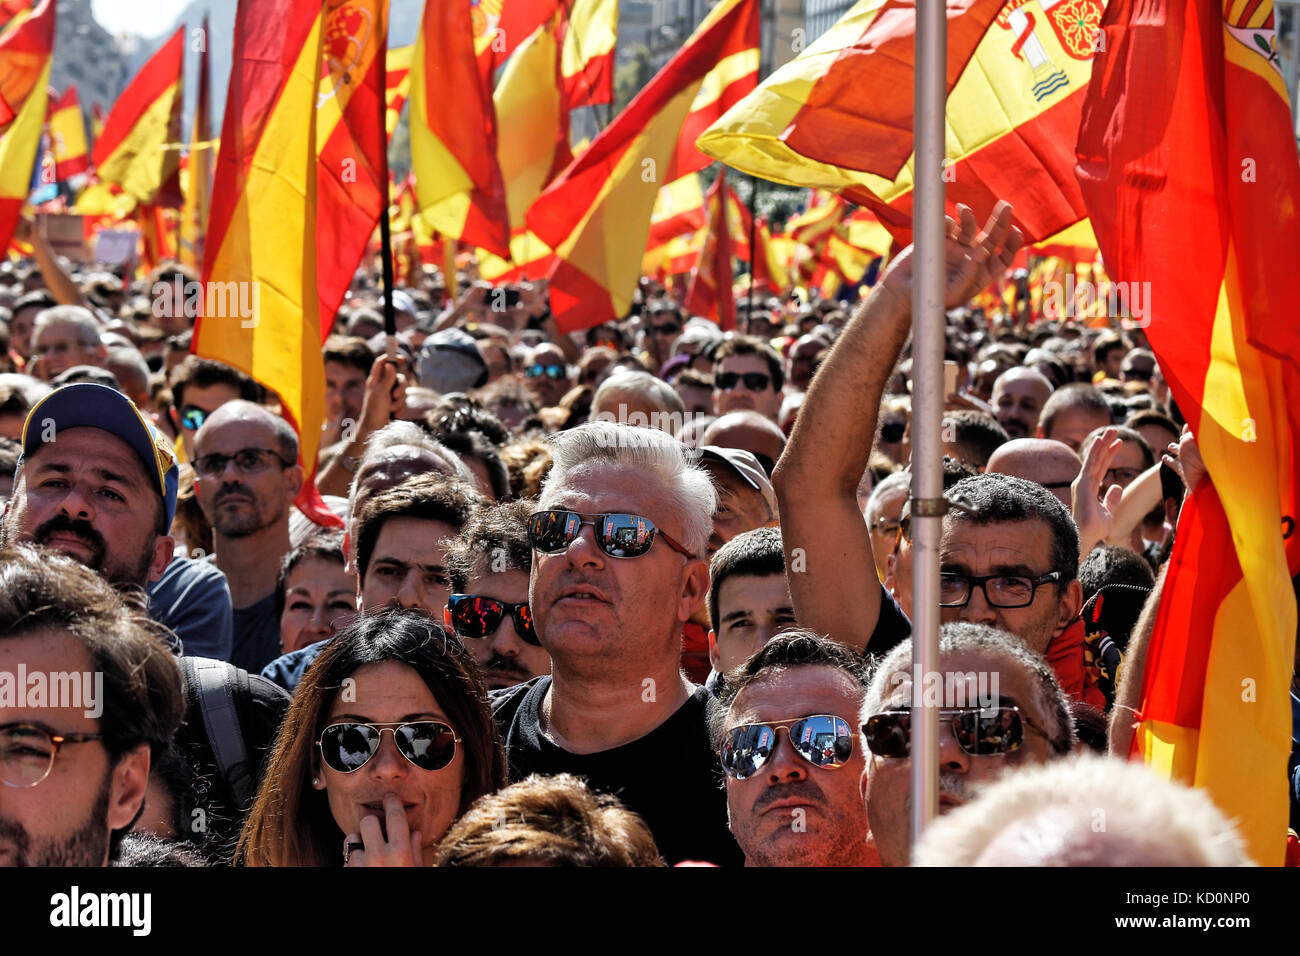 Barcelona, Catalonia, Spain. 08th October 2017. Demonstrators with sunglasses attending the manifesttion. Nearly 900.000 people attend the anti-independence manifestation in Barcelona, organised by Societat Civil Catalana, the most important pro-unity organisation.This can be considered a very great success for the anti-independent movement. All kind of people, including seniors, families, couples and children demonstrated pacifically against independence of Catalonia near by the Estacion de Francia Railway station. Karl Burkhof/Alamy Live News Stock Photo